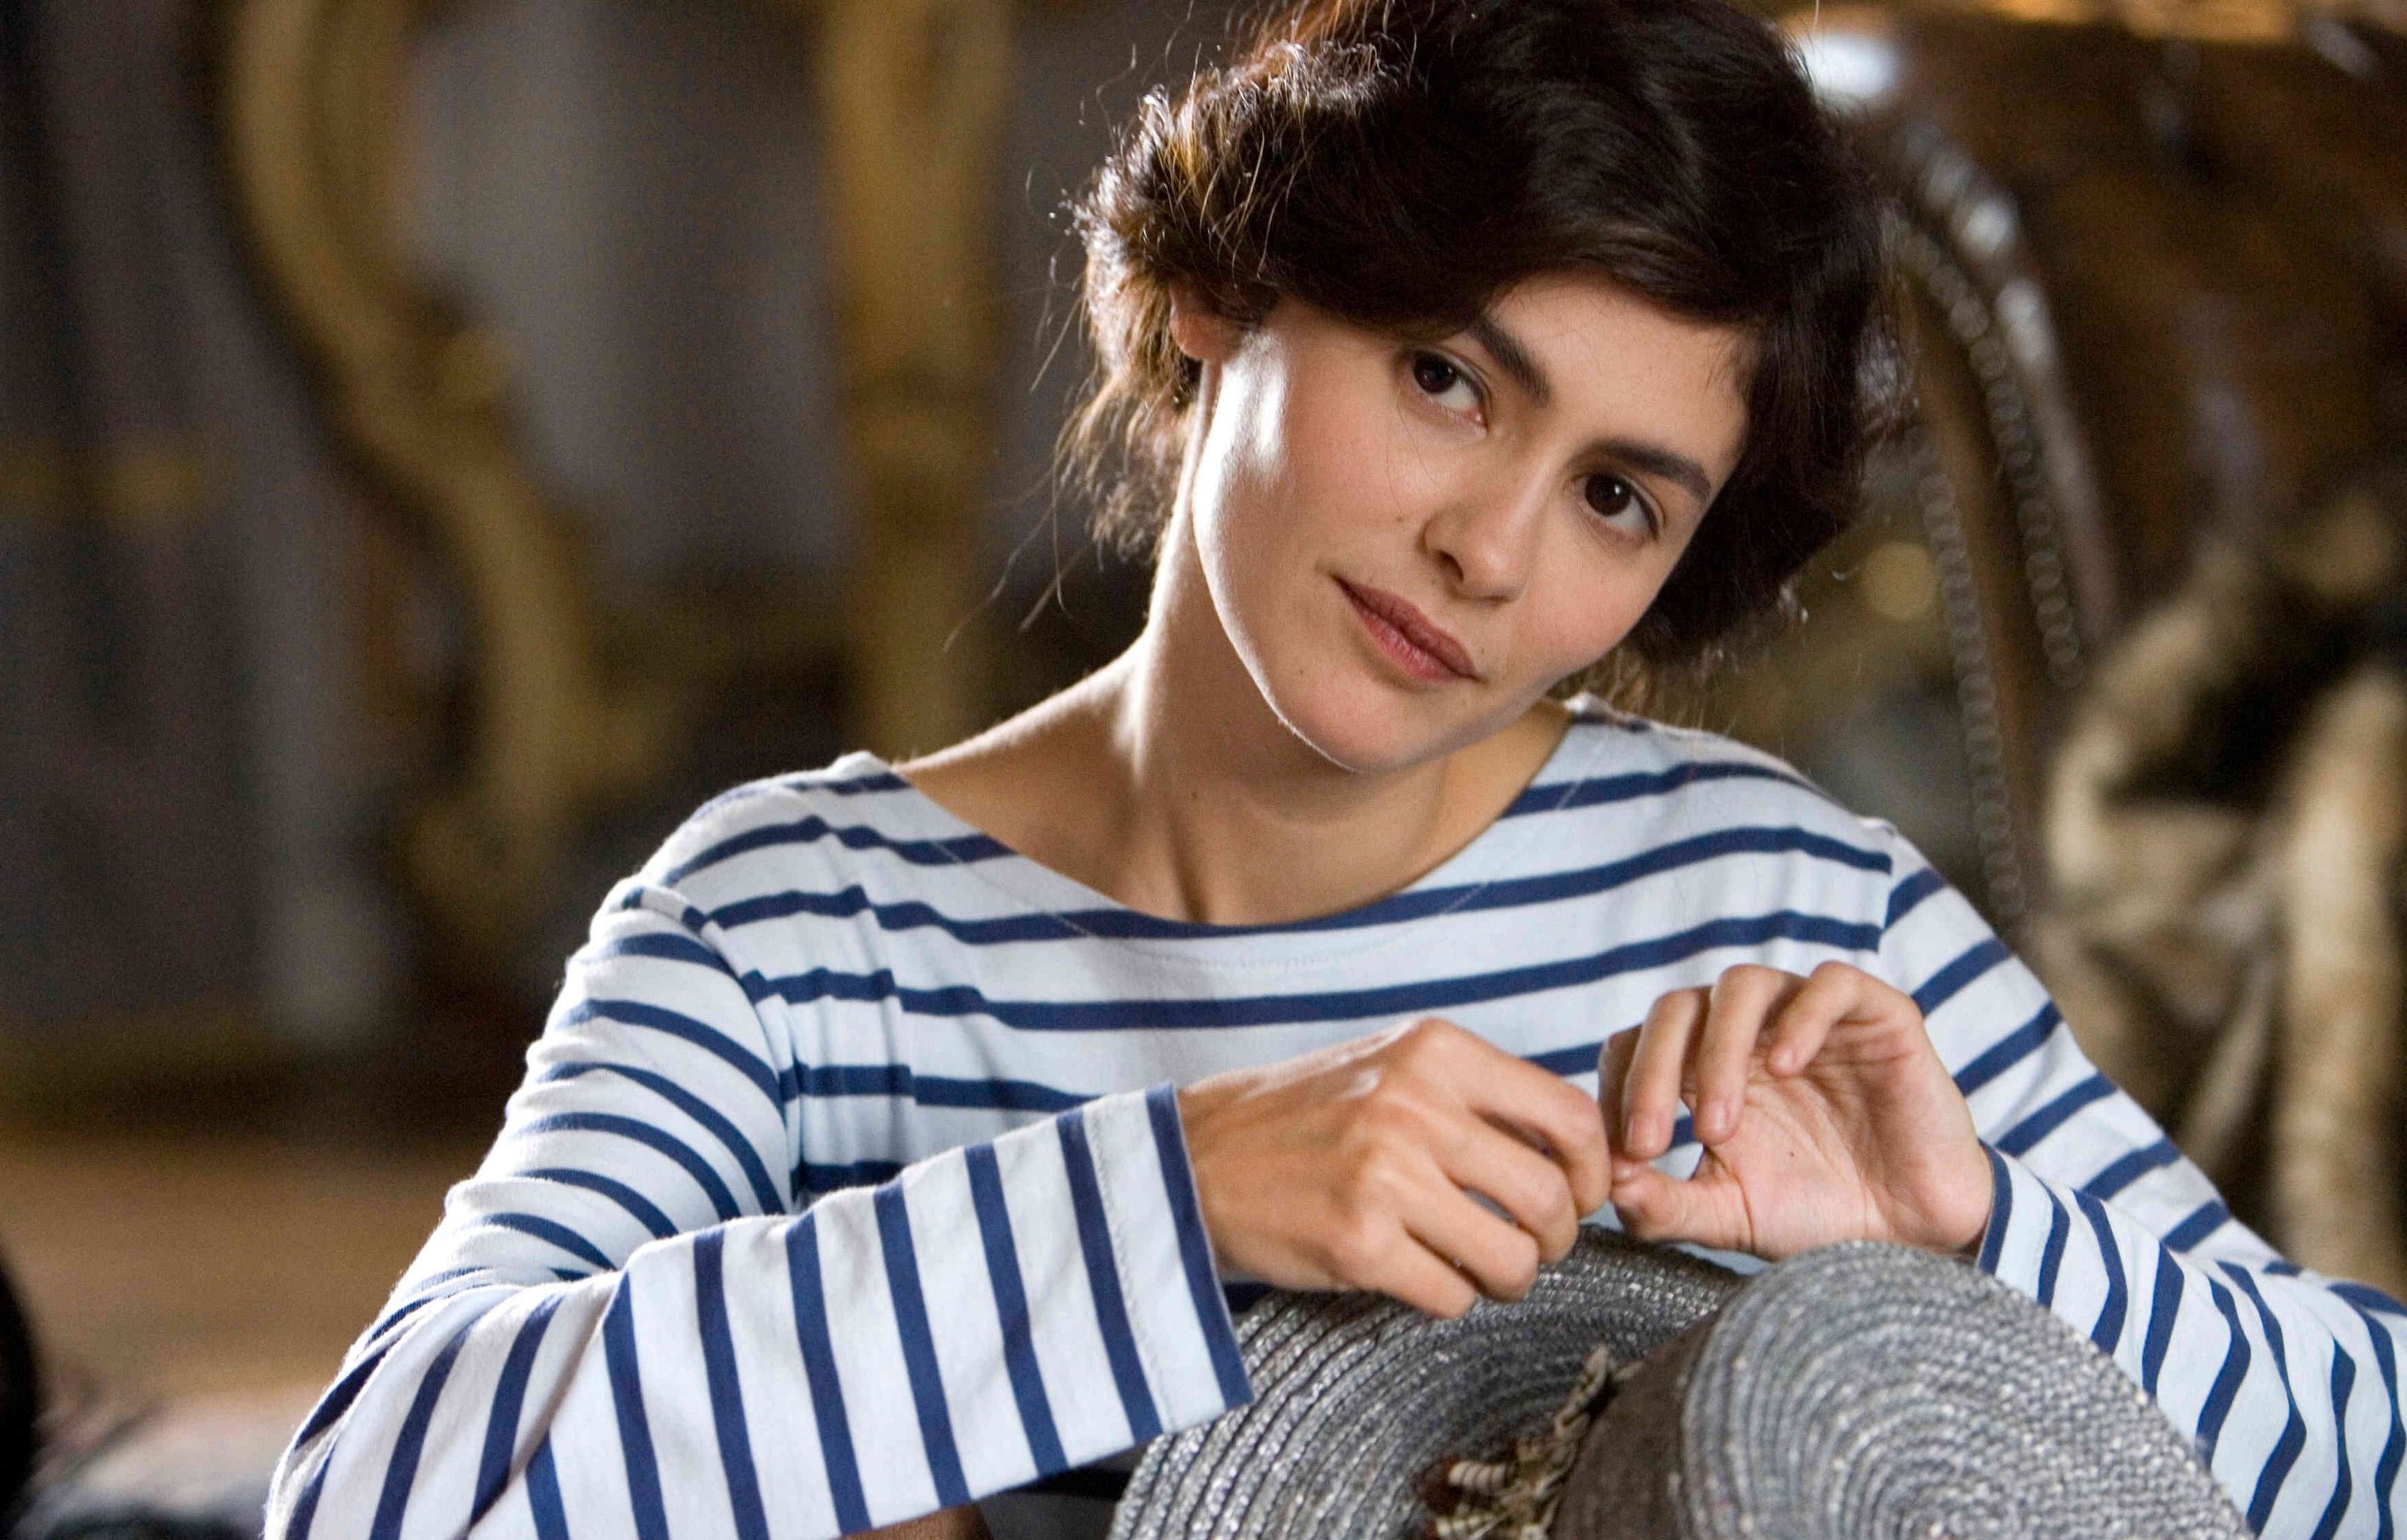 Audrey Tautou: 'Coco Before Chanel' Movie, Audrey Starring As Gabrielle 'Coco' Chanel. 3200x2050 HD Wallpaper.